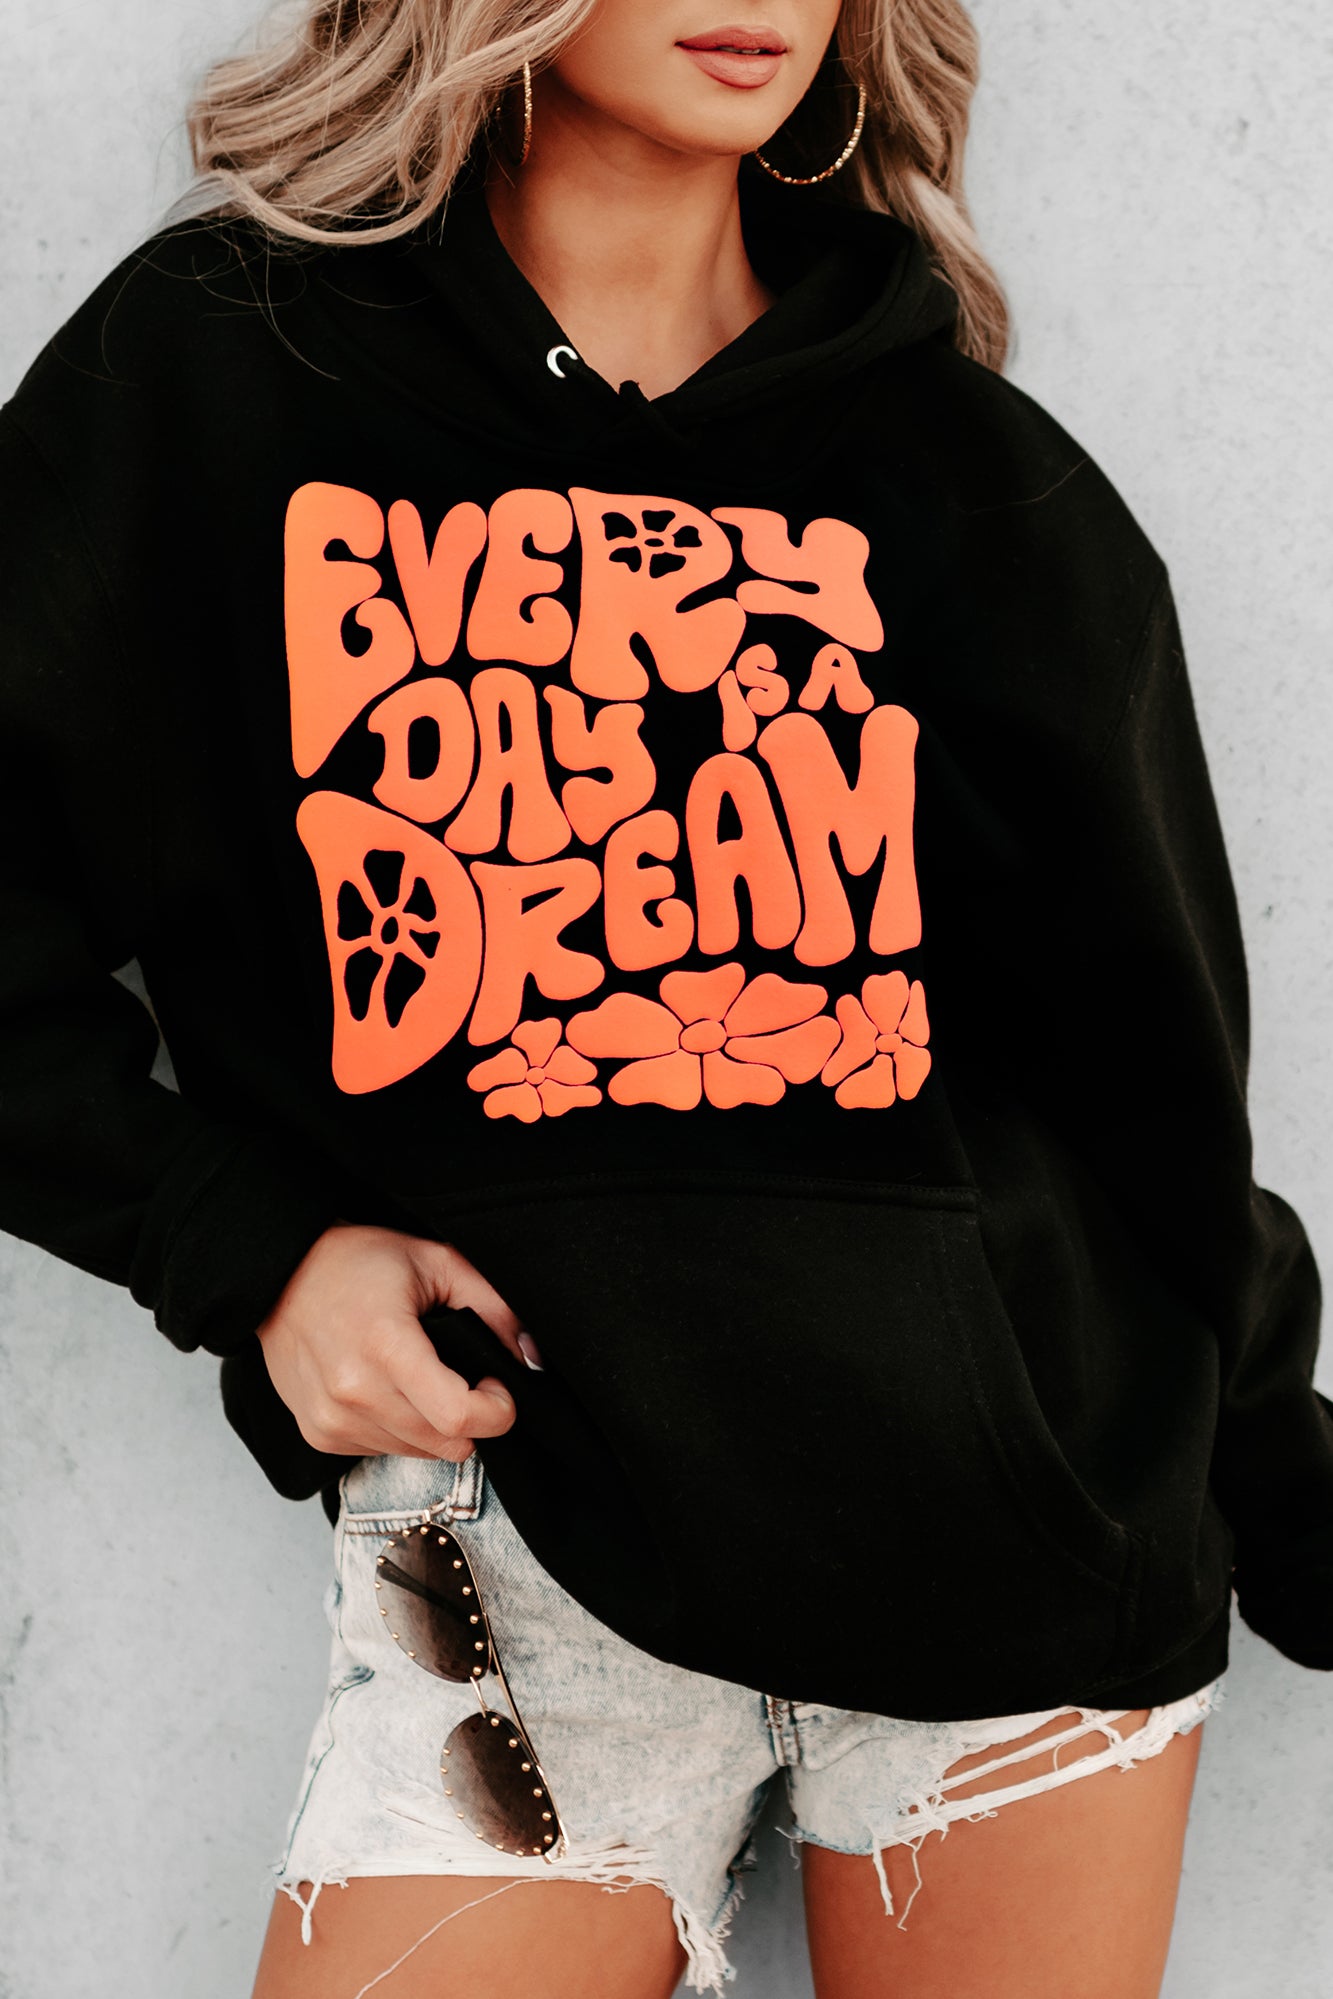 "Every Day Is A Dream" Puff Graphic Multiple Shirt Options (Black) - Print On Demand - NanaMacs